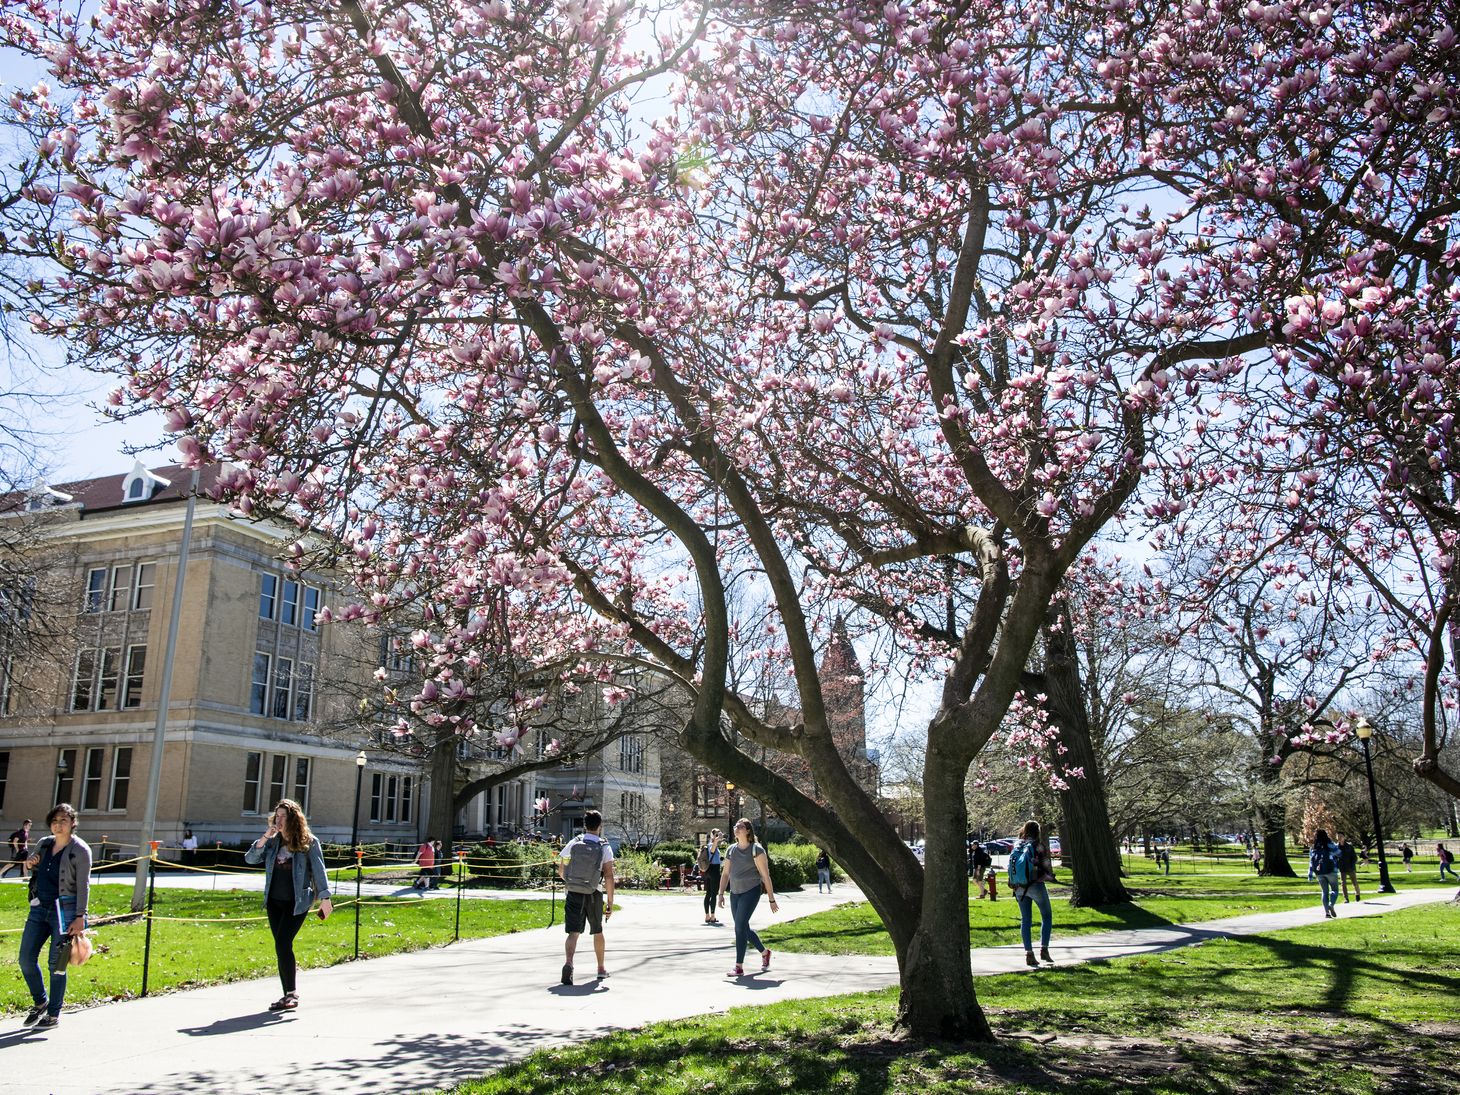 Students walking on campus during Spring